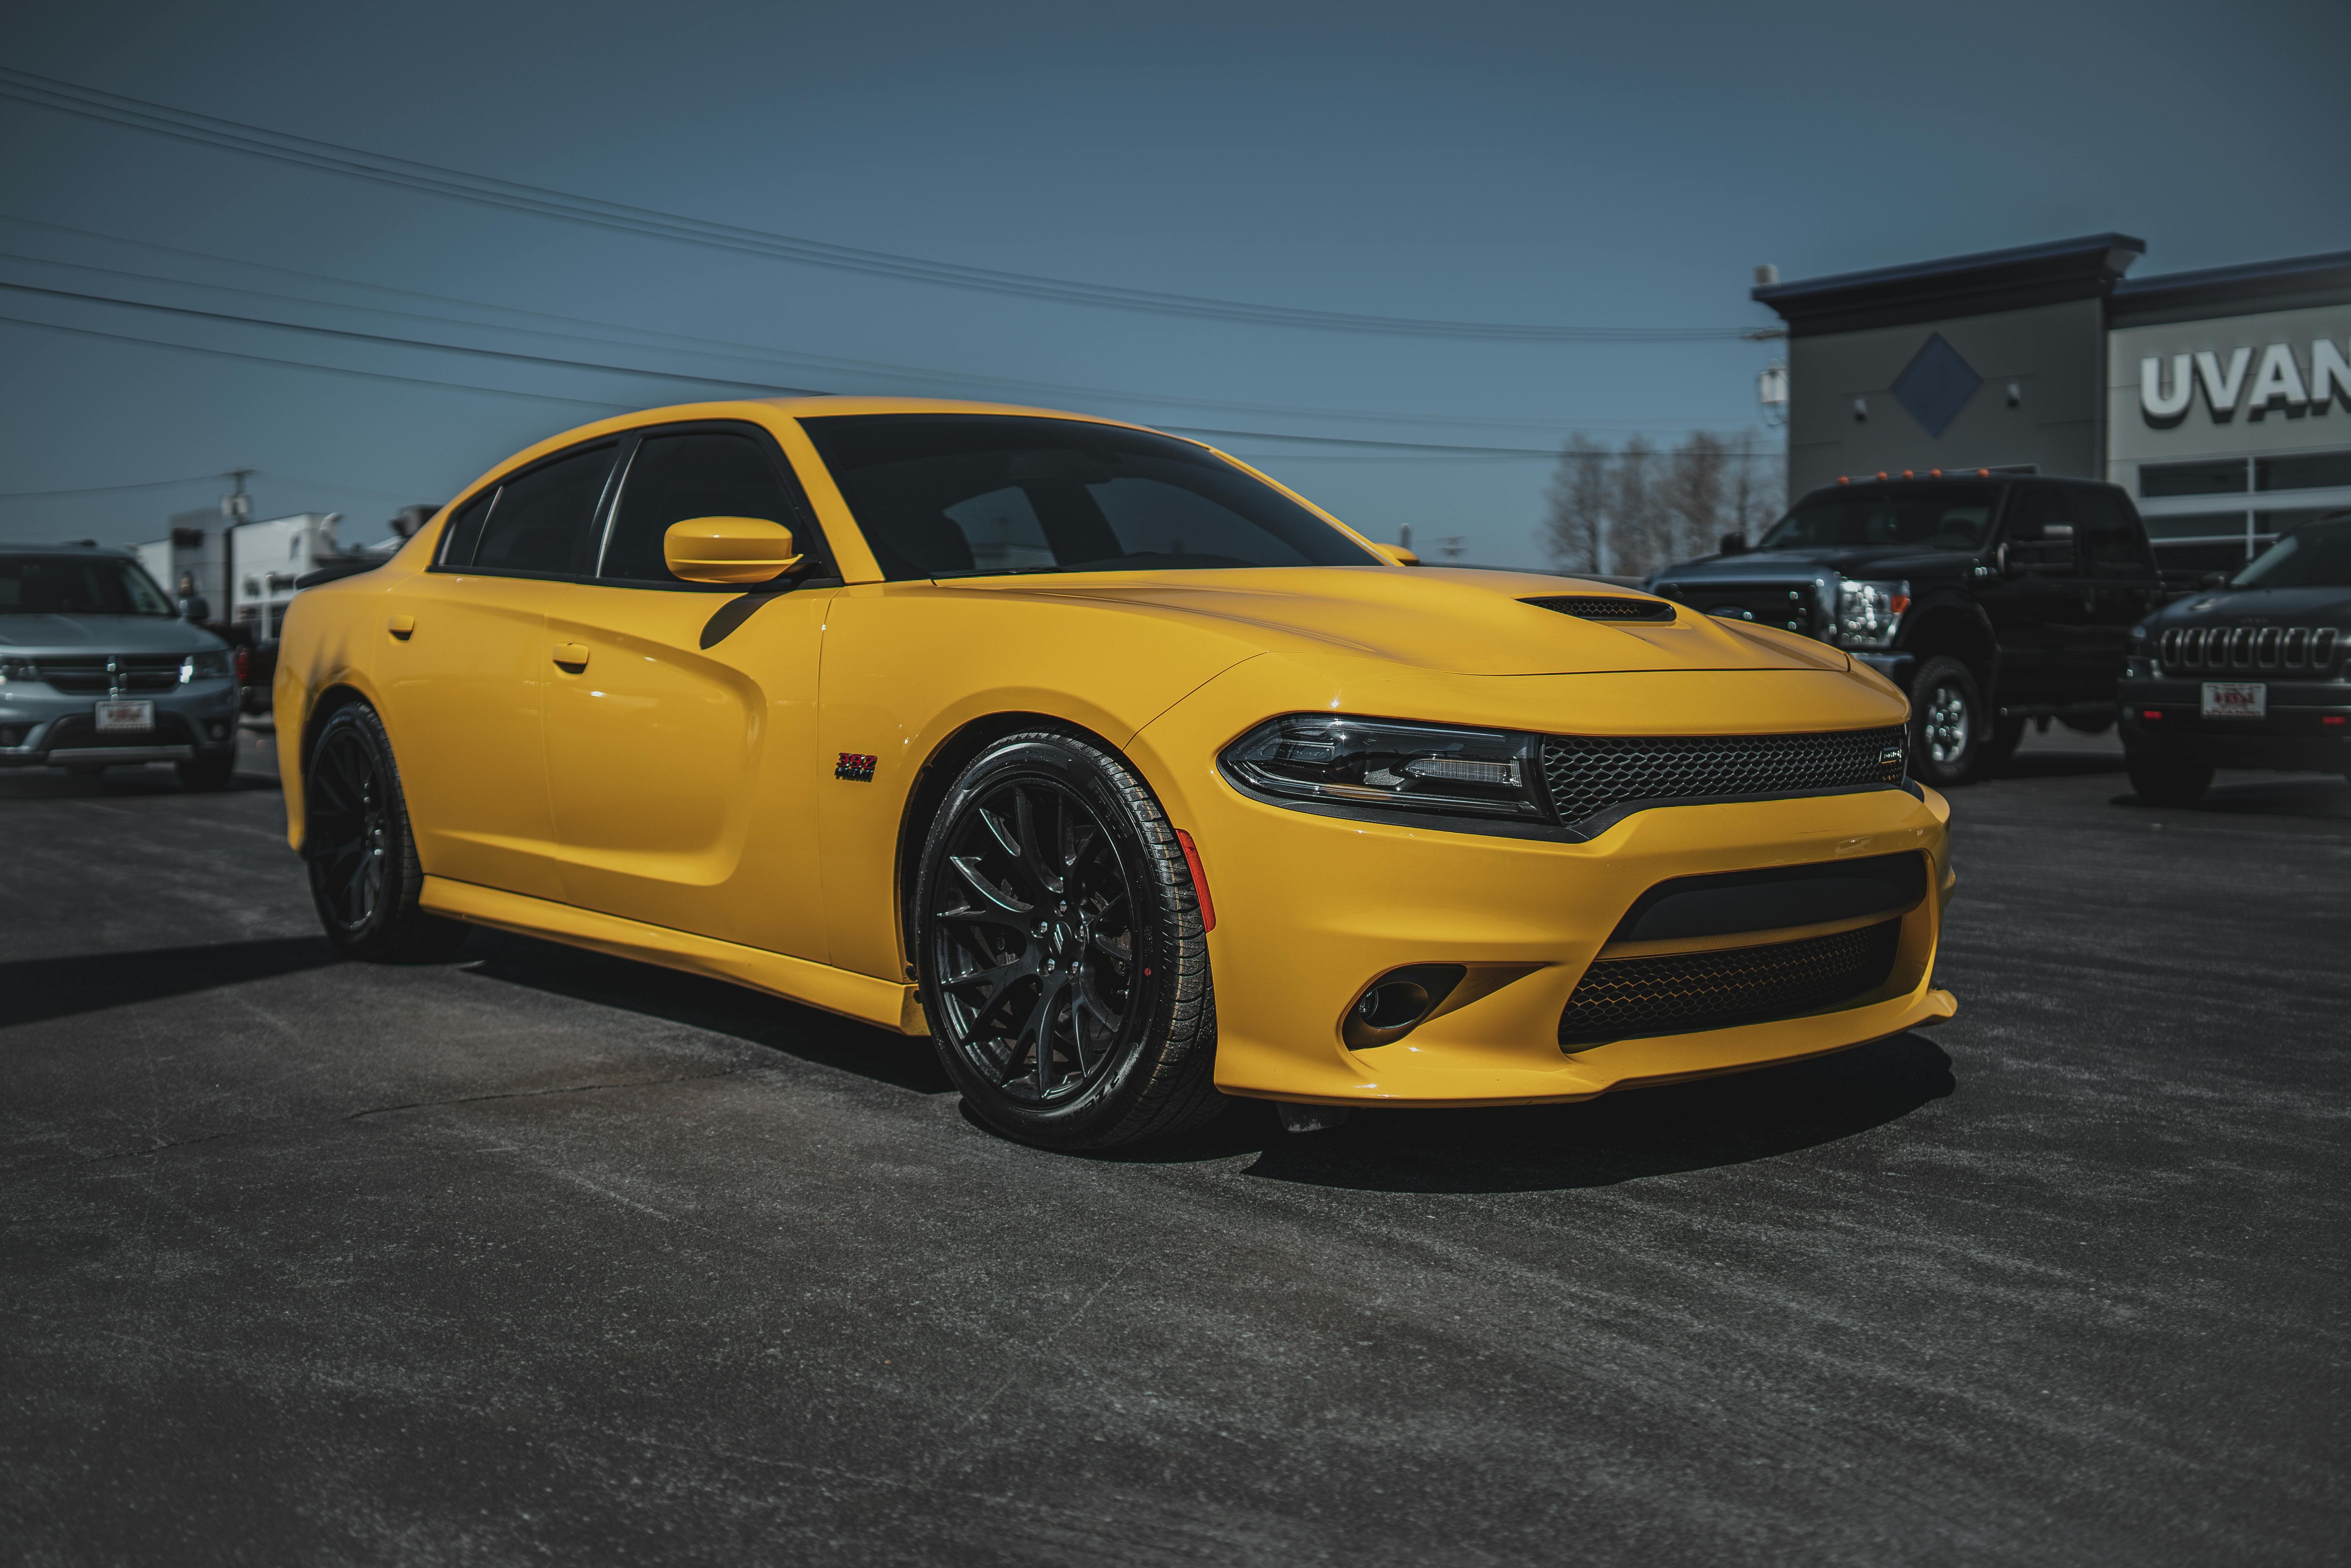 A Parked Yellow Dodge Charger · Free Stock Photo